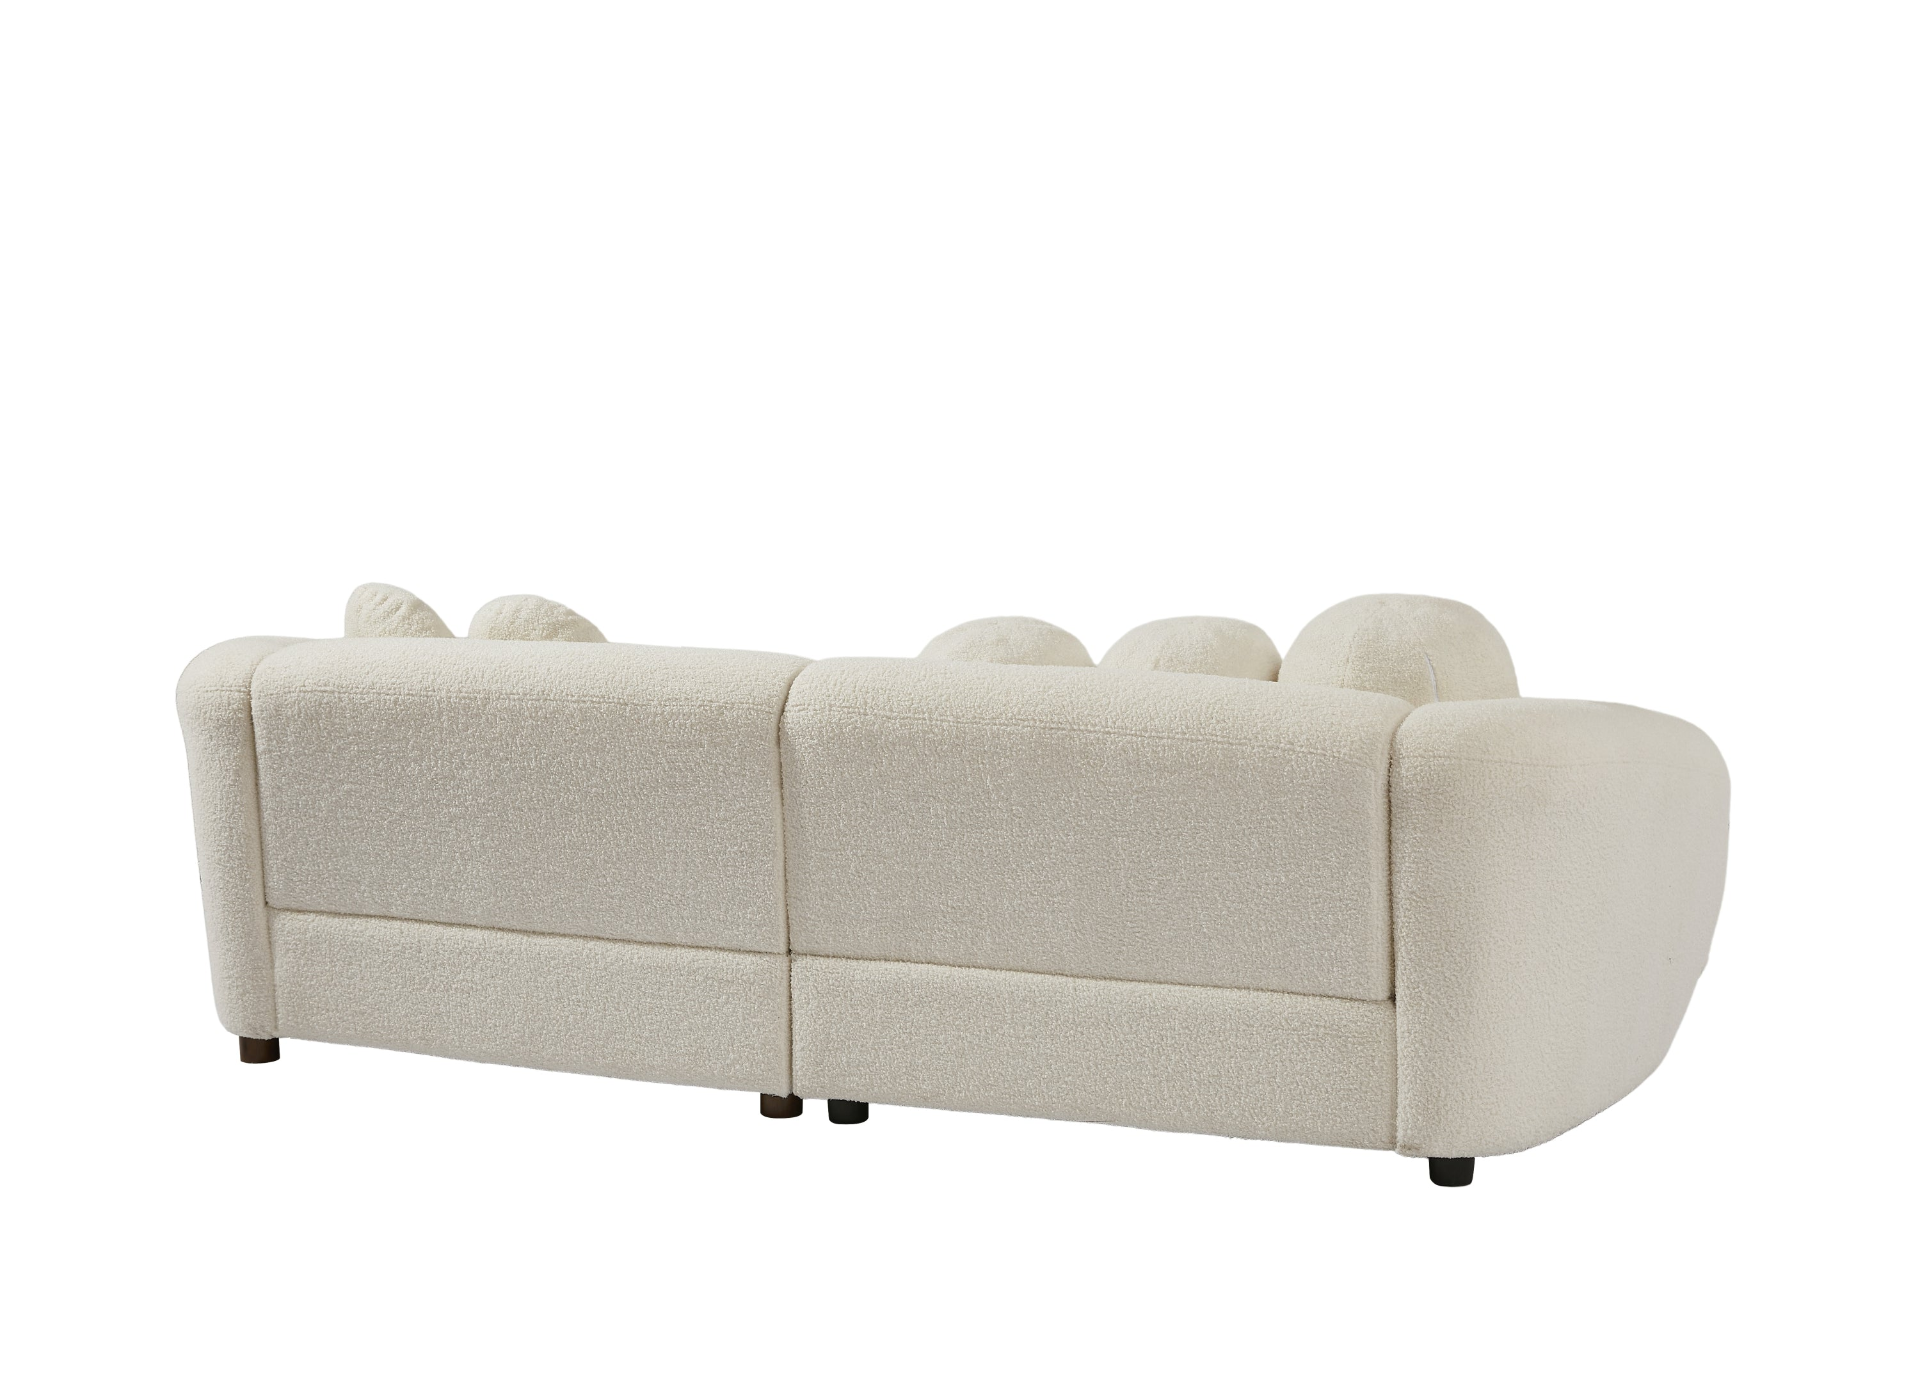 Beige - Stylish Contemporary Curve Style Sofa With (5) Throw Pillows - (87.7")